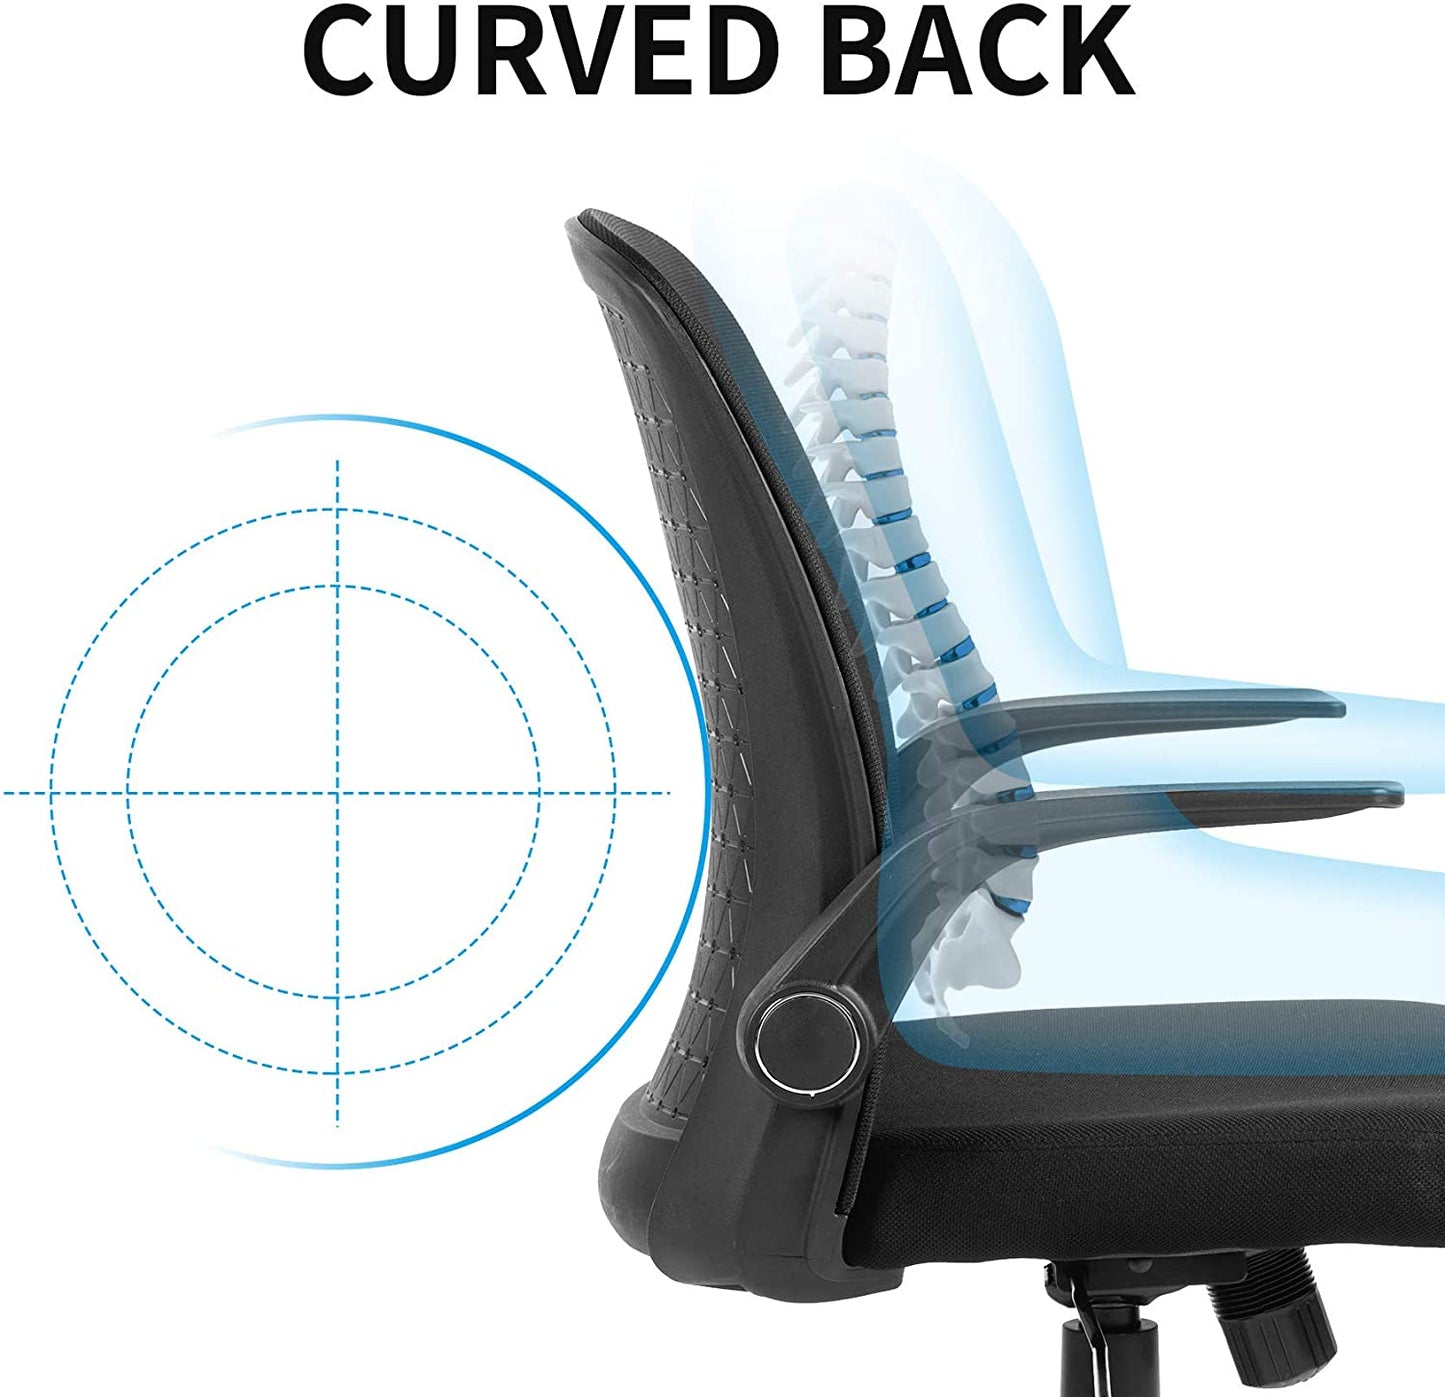 UNICOO - Office Chair Ergonomic Mid Back Swivel Chair, Mesh Computer Chair, Office Task Desk Chair, Home Comfort Chairs with Flip-up Armrests (W-179-1 Black)